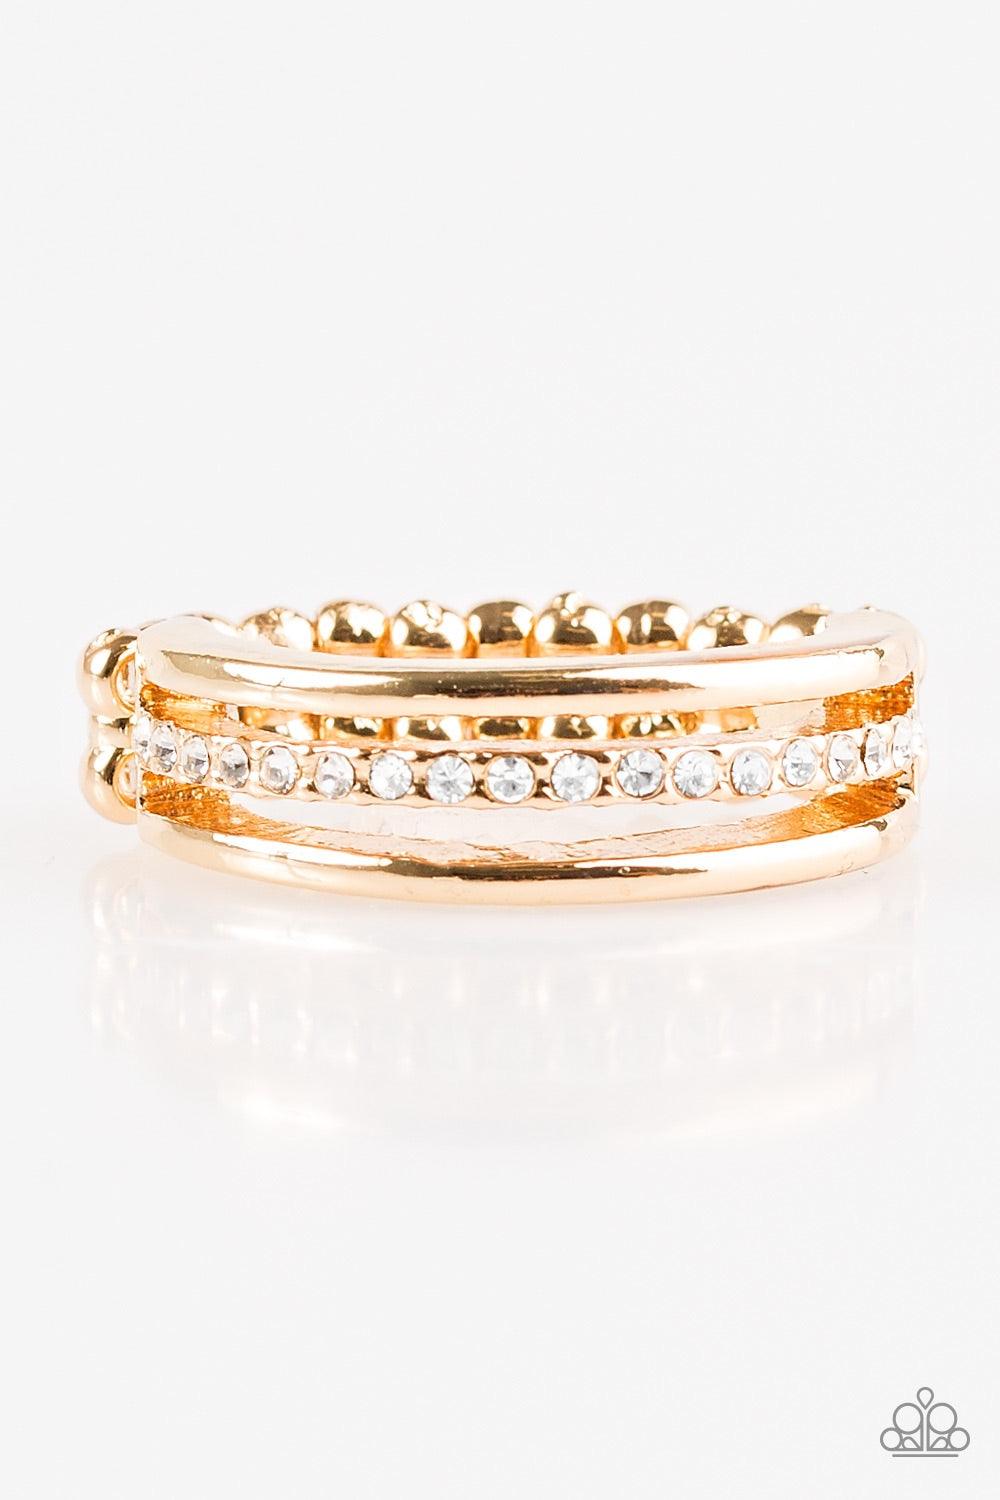 Paparazzi Accessories Center Court - Gold Dainty gold bands layer across the finger. The centermost band is encrusted in white rhinestones for a glamorous finish. Features a dainty stretchy band for a flexible fit. Jewelry